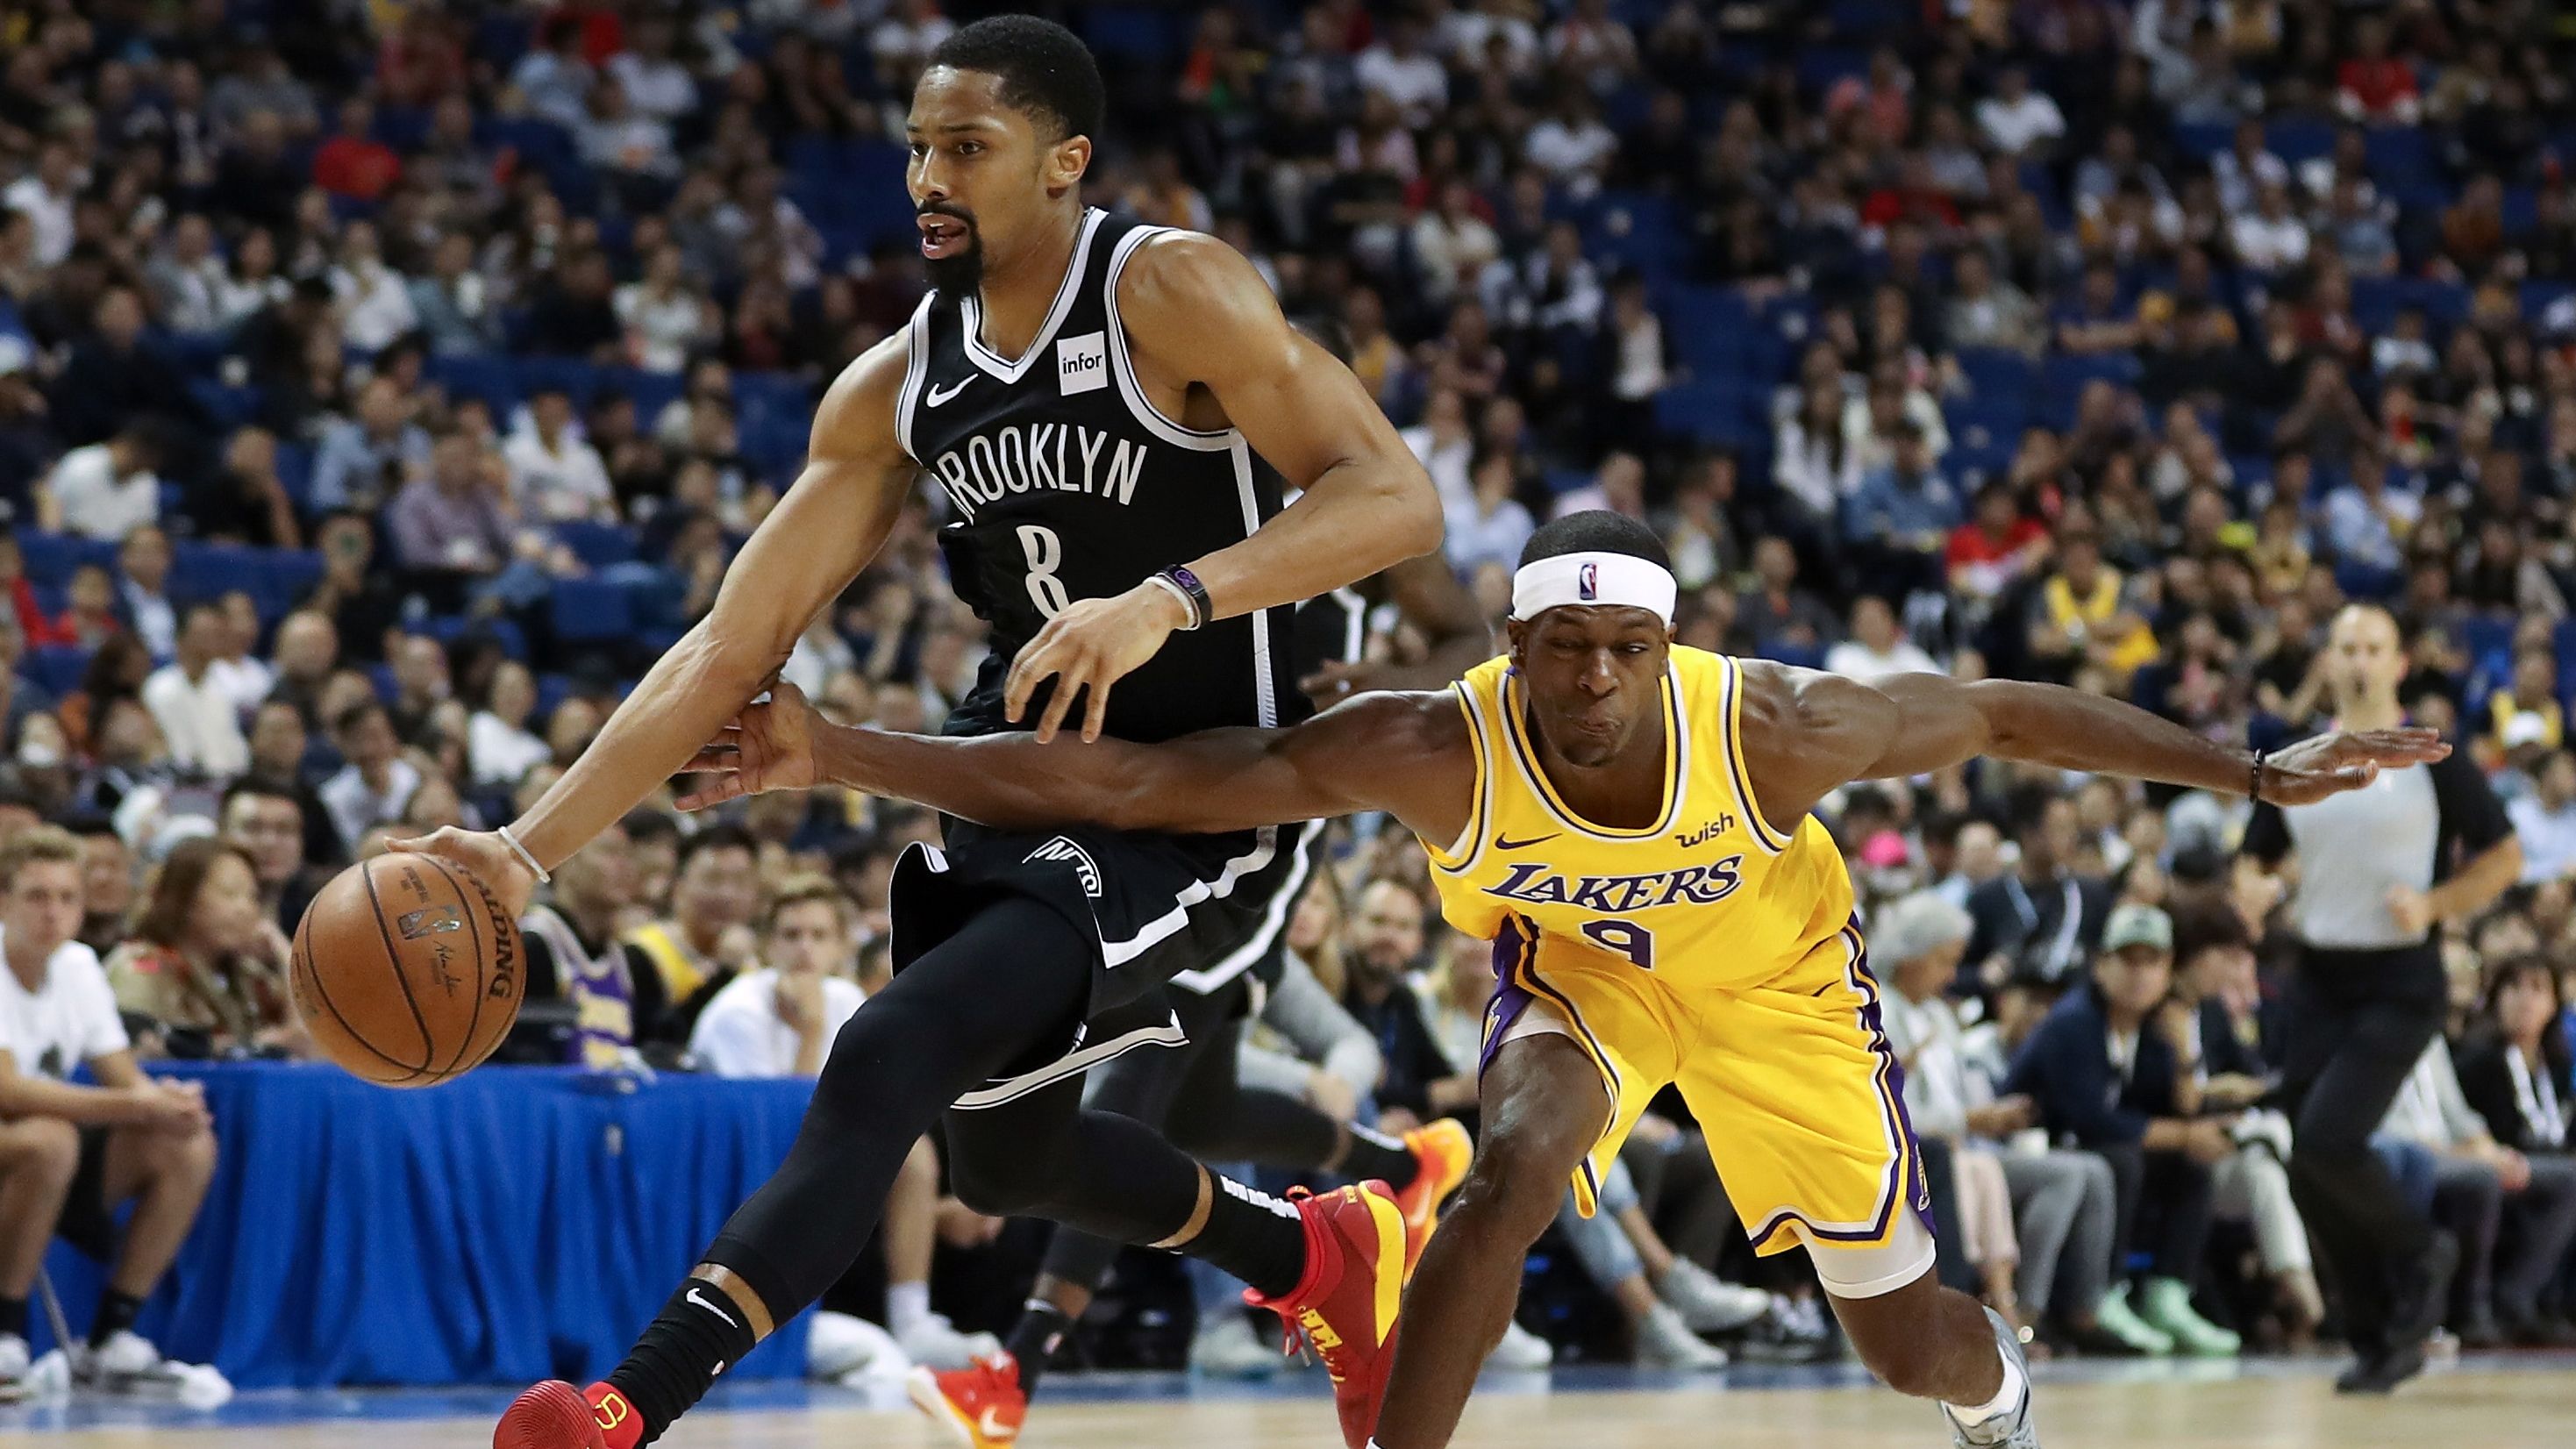 Spencer Dinwiddie #8 of of the Brooklyn Nets in action against Rajon Rondo #9 of the Los Angeles Lakers in Shanghai.